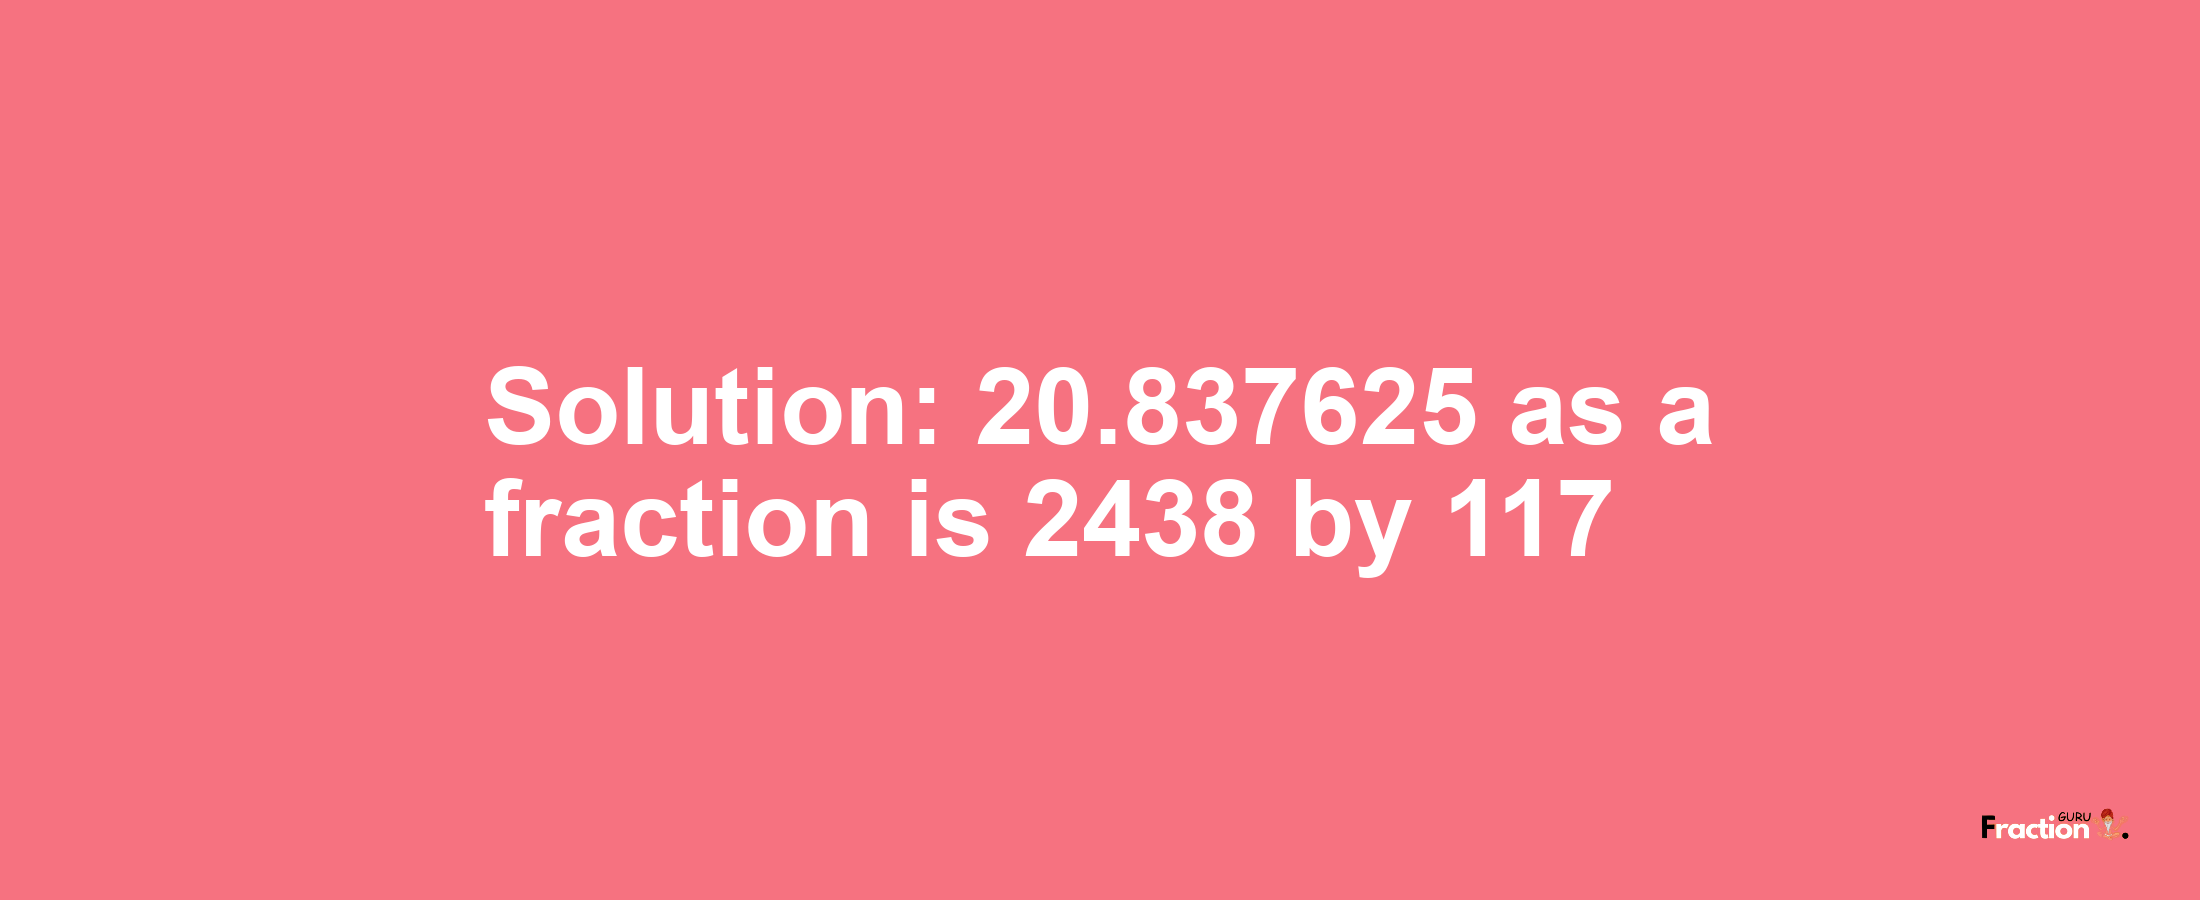 Solution:20.837625 as a fraction is 2438/117